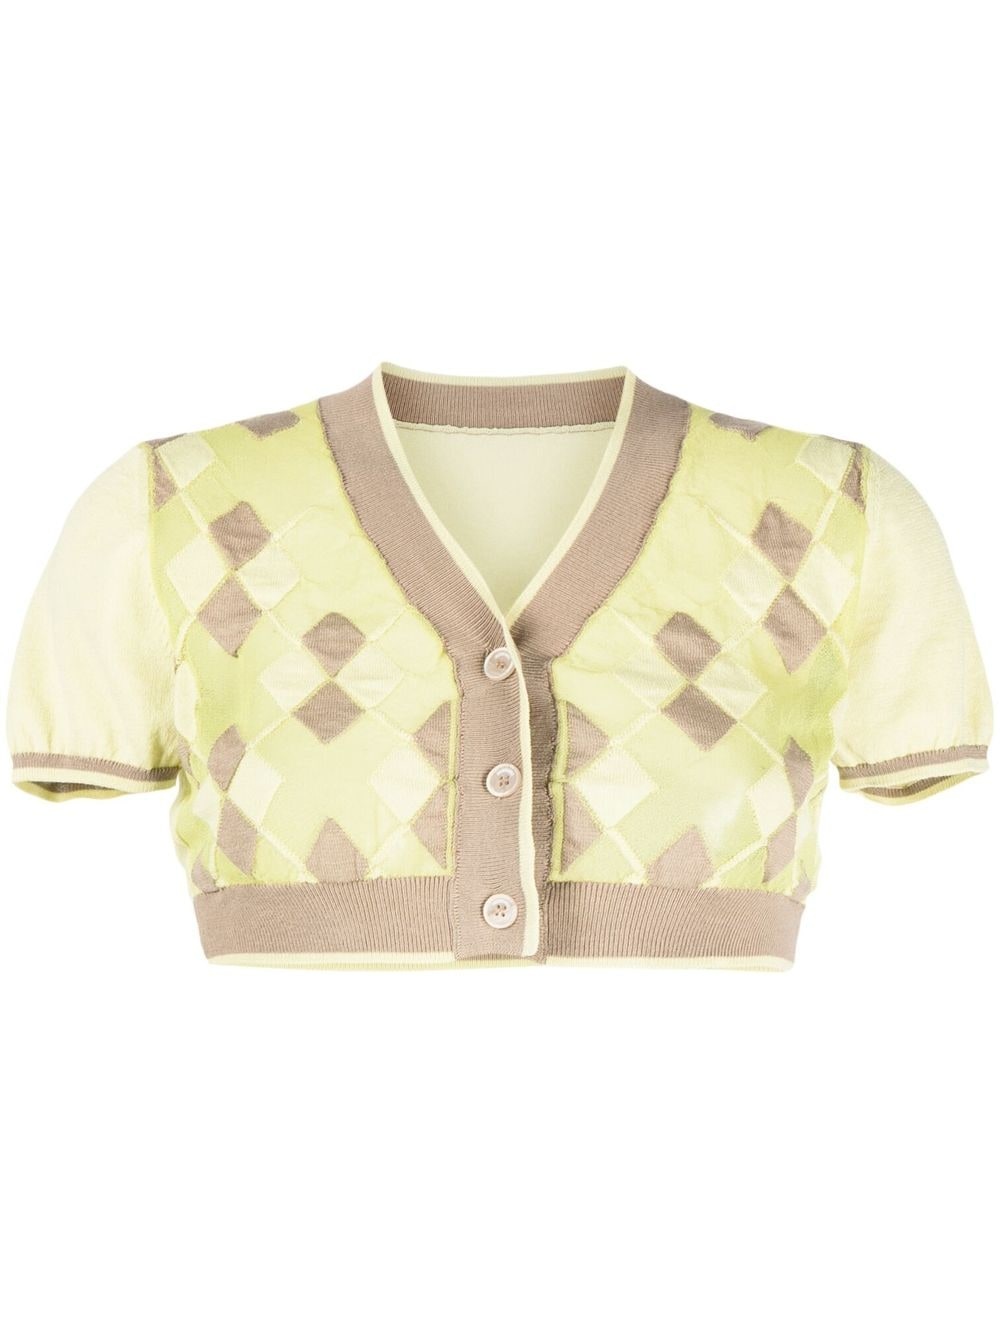 argyle-check-pattern cropped top - 1